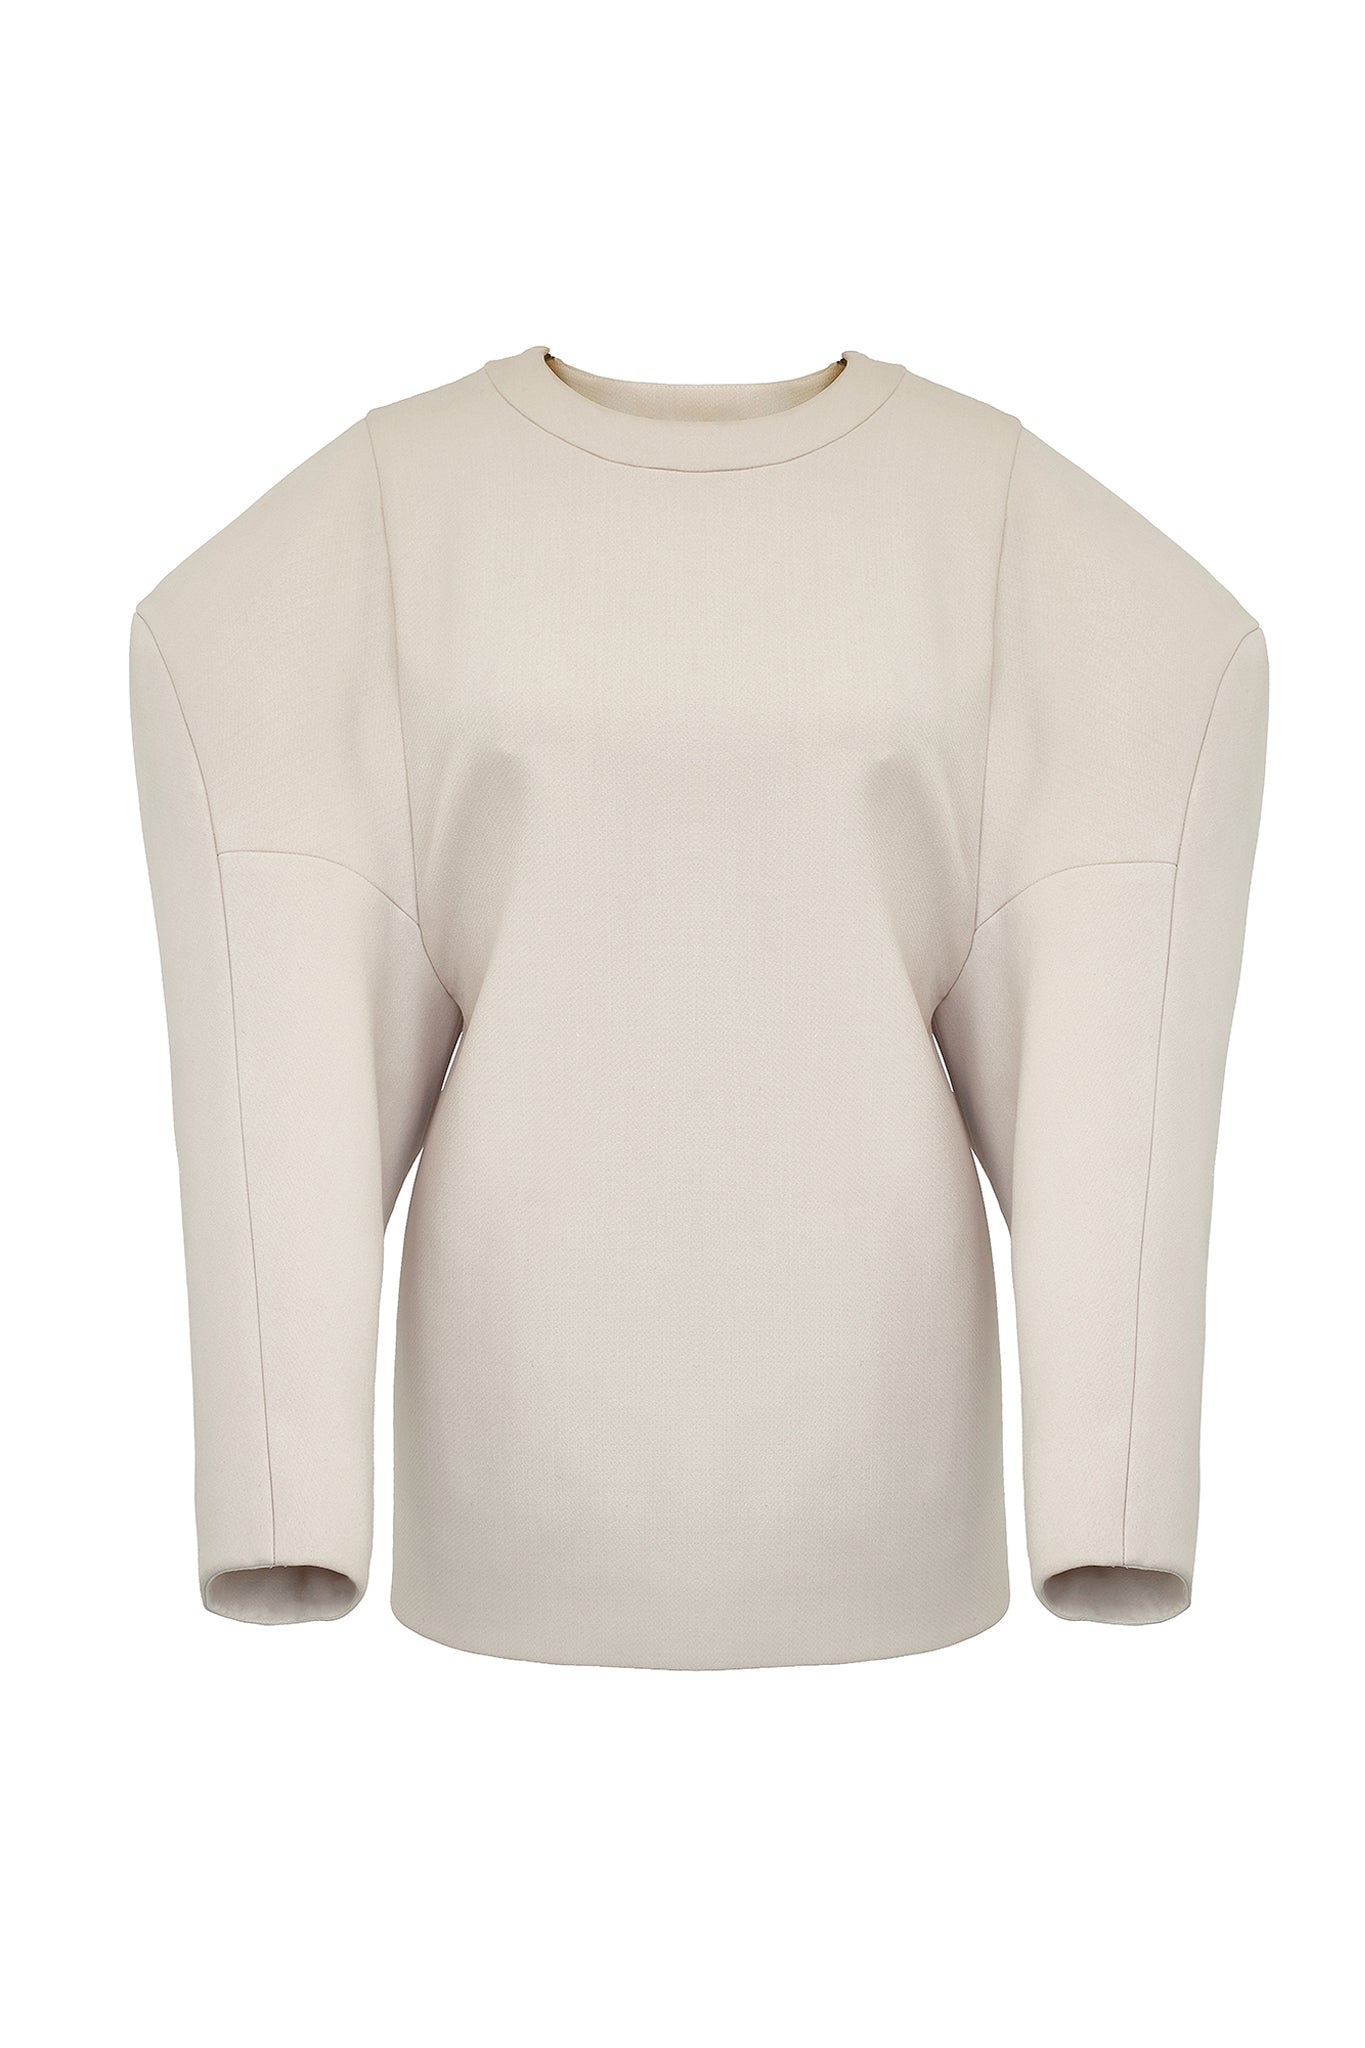 This casual sweatshirt-style top features gigantic exaggerated sleeves with an unusual dropped shoulder line. The colossal shoulders are enhanced by the clean nature of the body, and share the same sleeve construction as the “Extra” coat. The sleeves have been bonded in self, to give them a little more body and sumptuousness.  To close there is a zip in each of the shoulders. The inside is clean with bound seams to finish.  